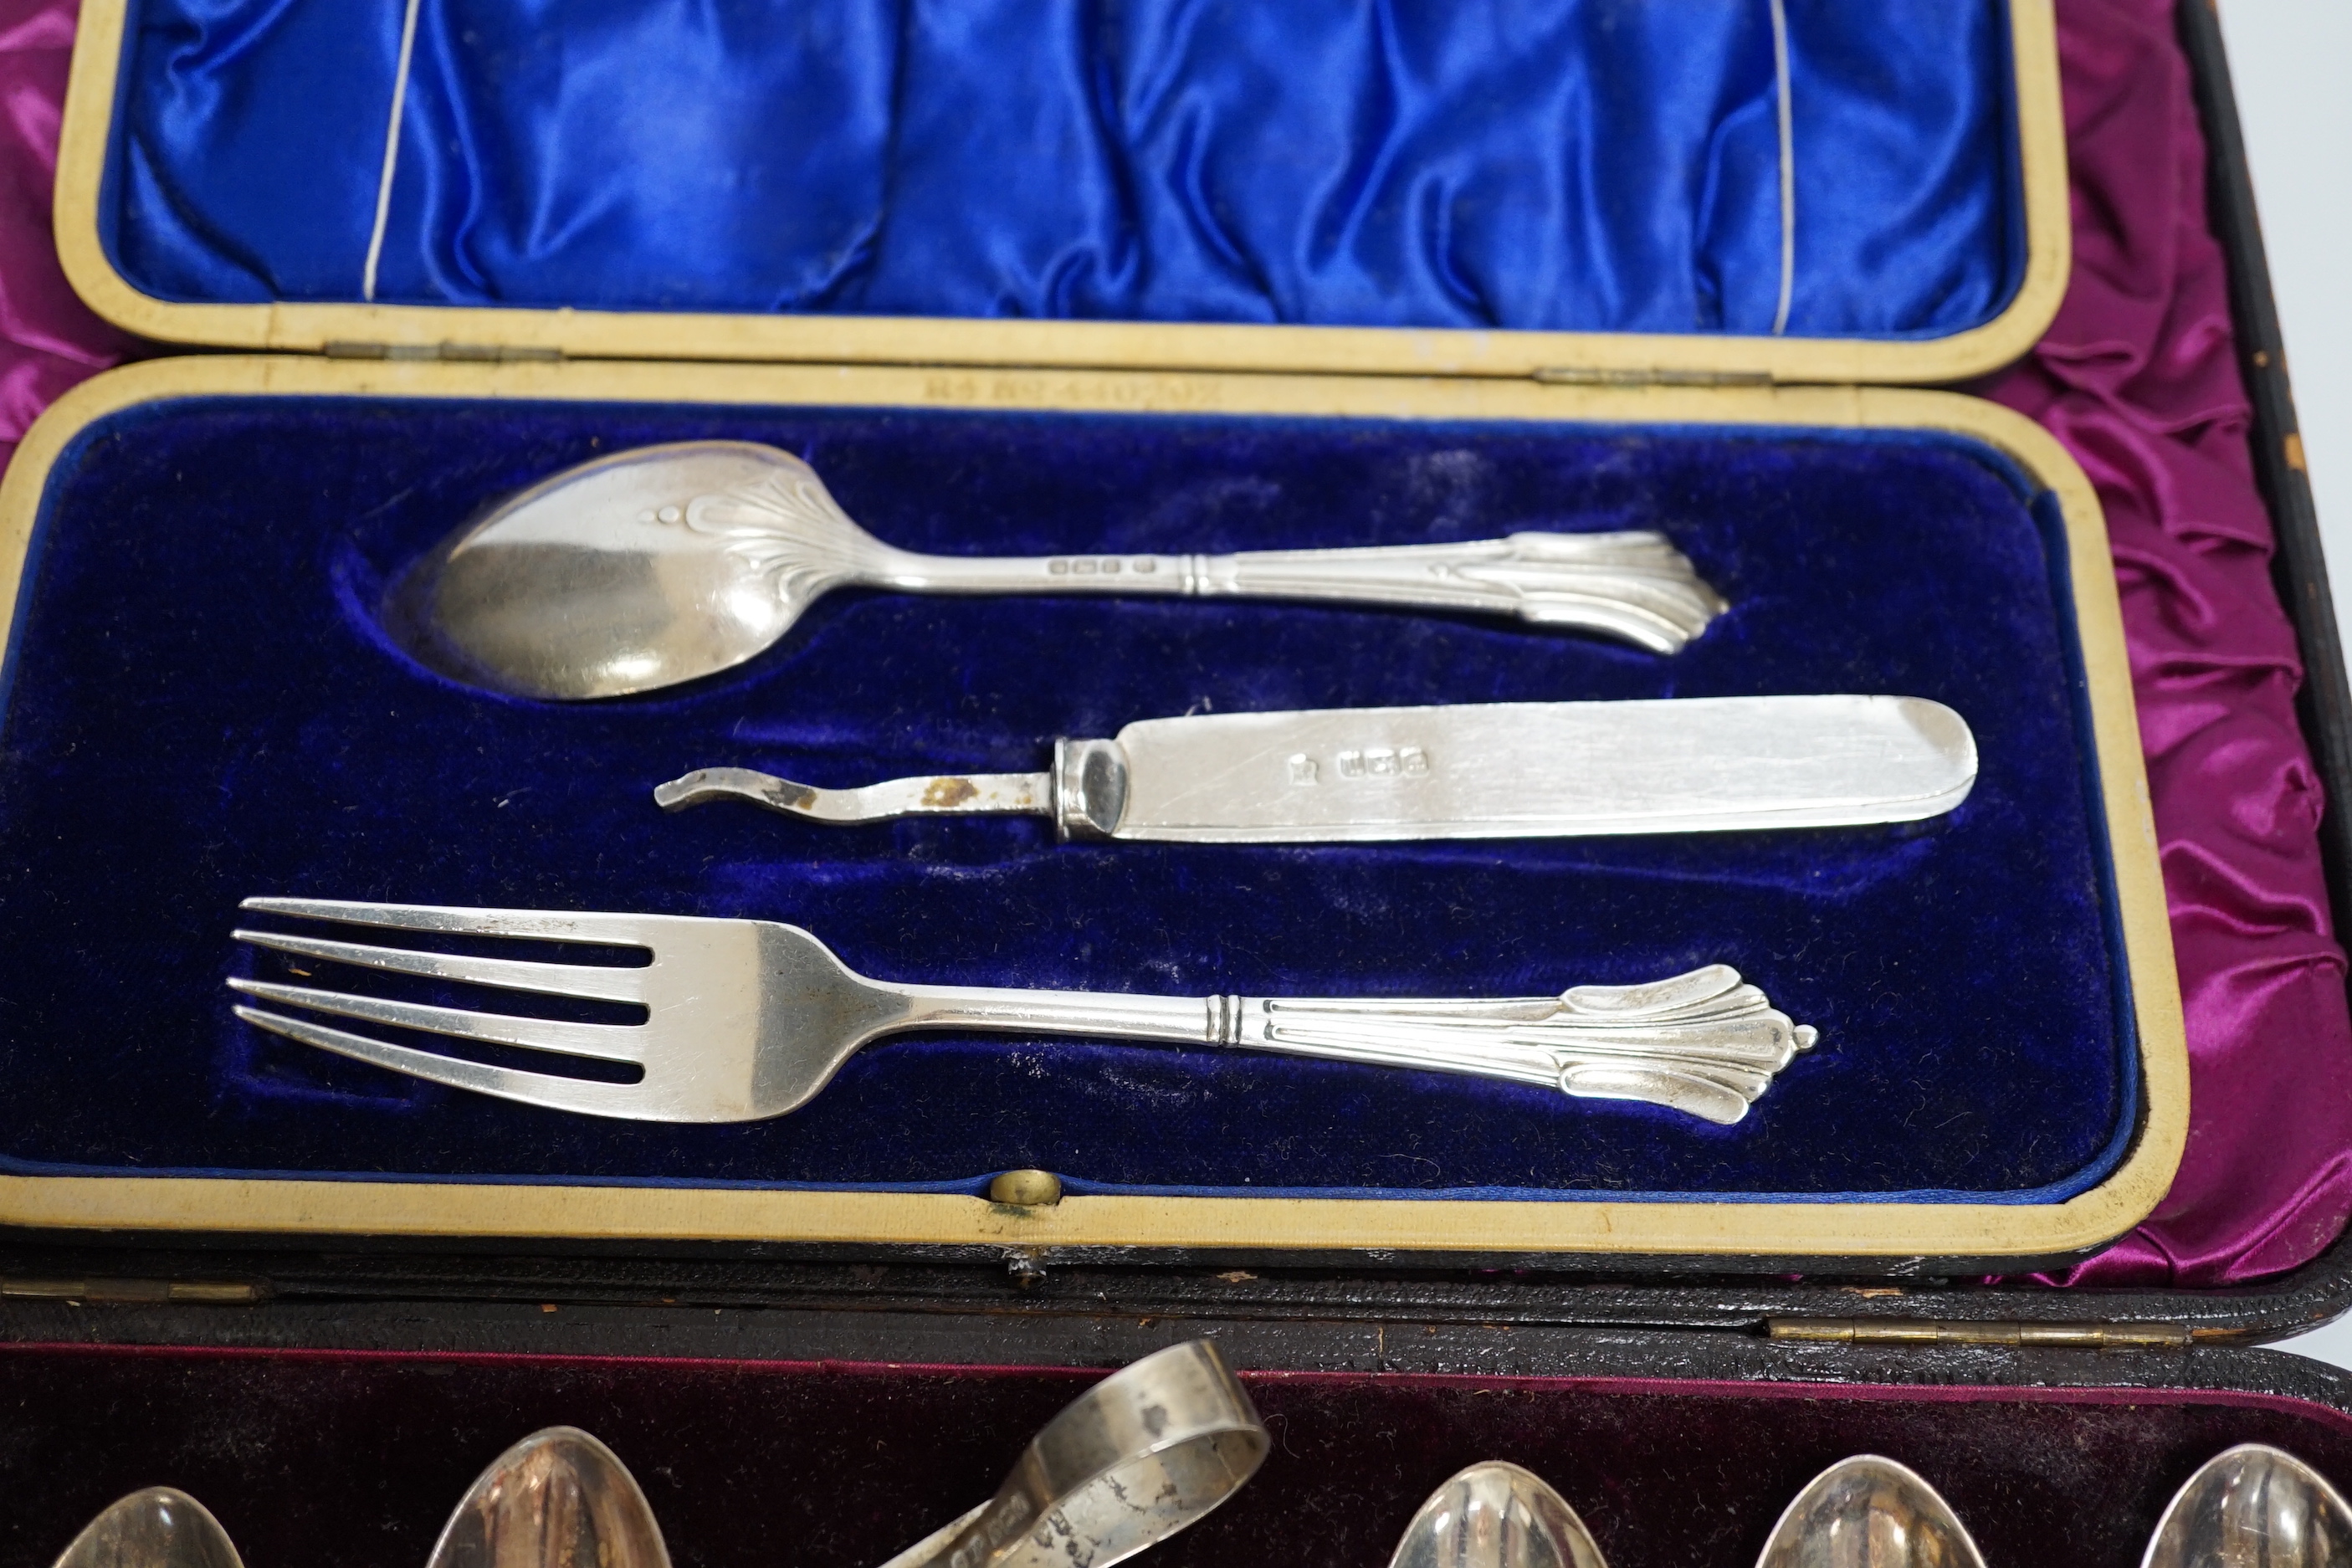 Two sets of six silver teaspoons, fiddle and Old English pattern and other silver or 900 flatware - Image 3 of 5